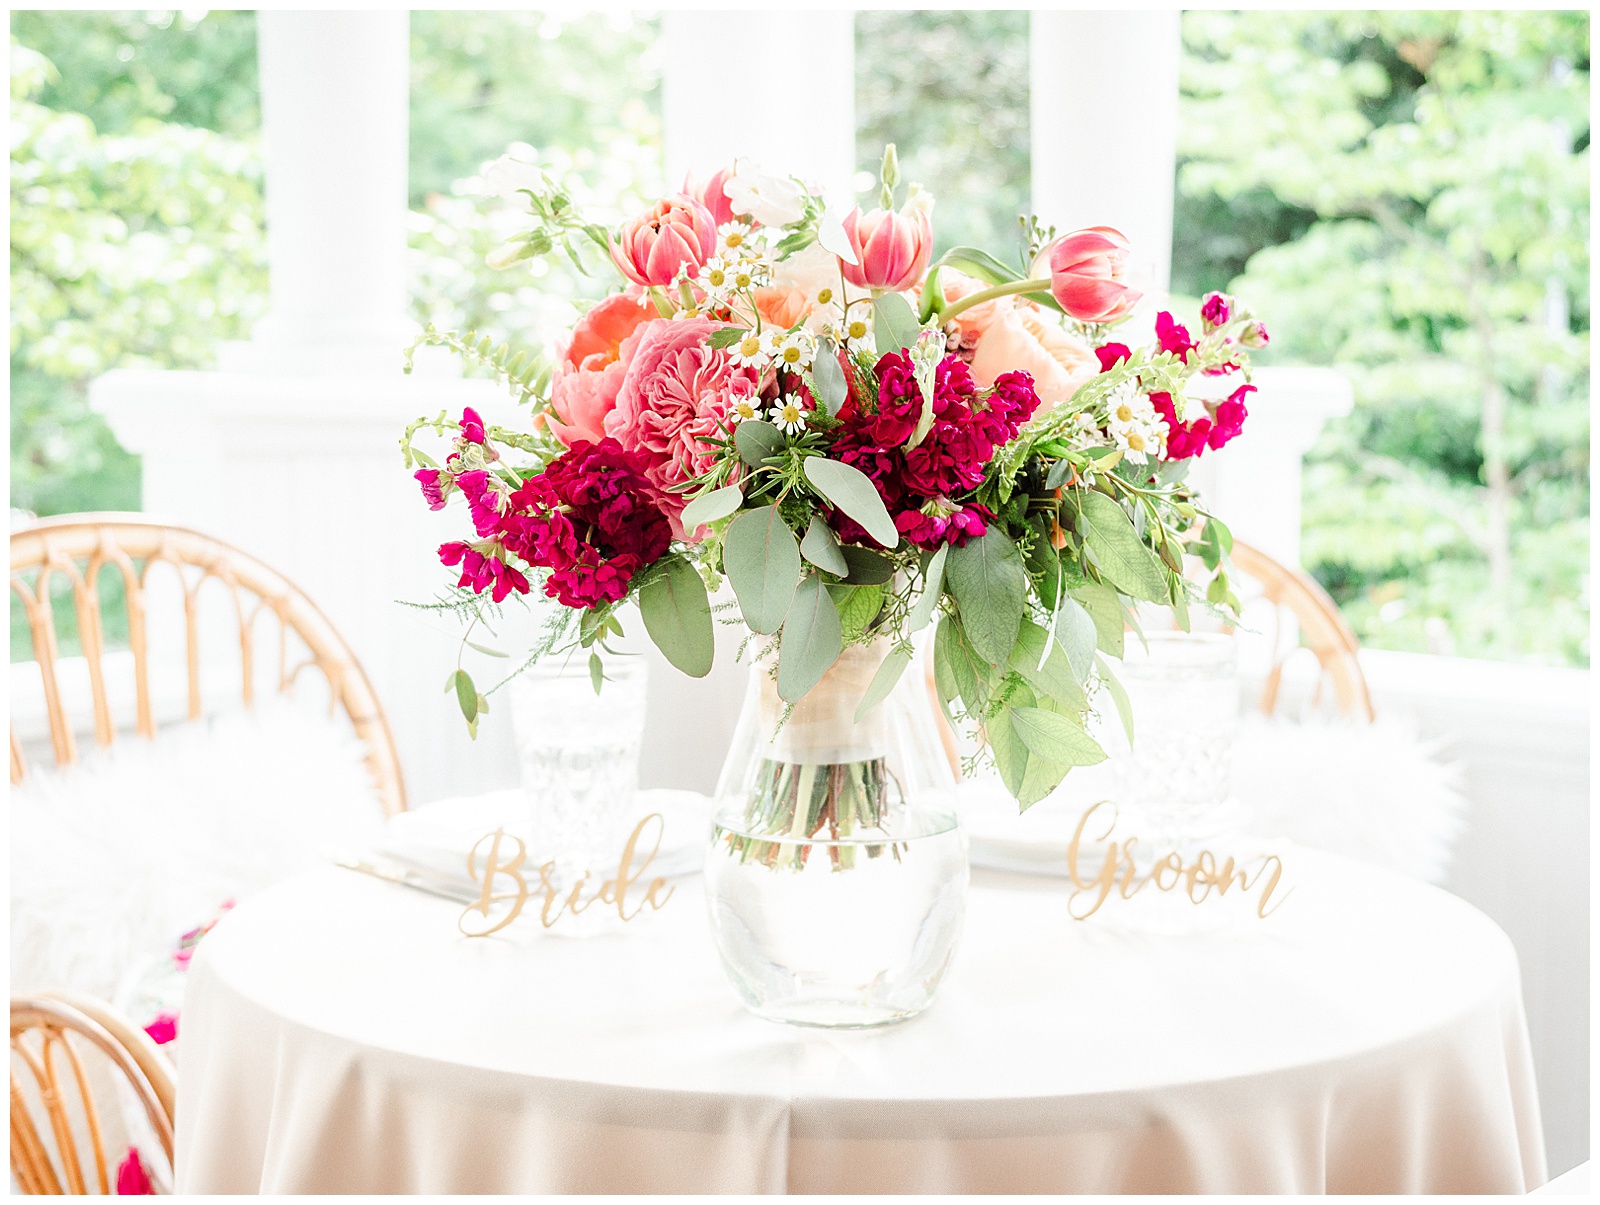 Enchanting white table setting and bright floral centerpiece from Boho Chic Summer Wedding in Charlotte, NC | check out the full wedding at KevynDixonPhoto.com 